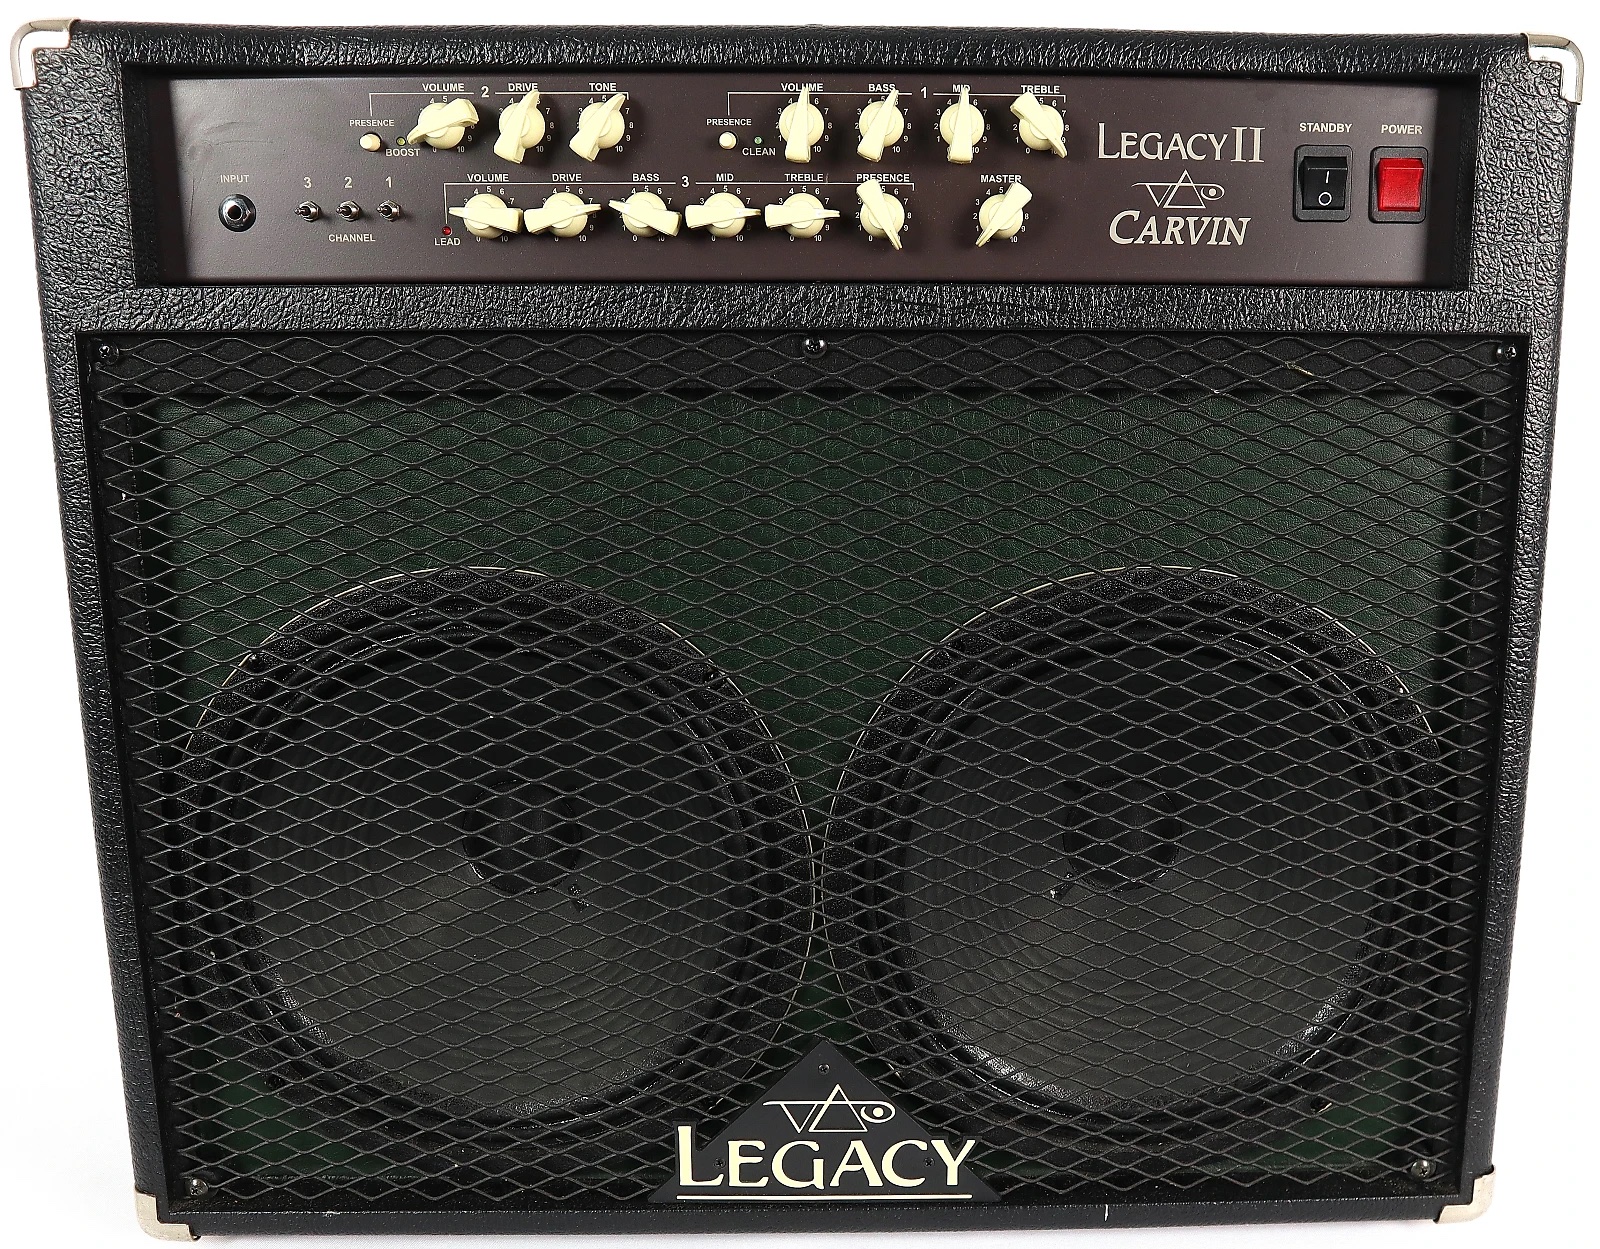 Steve Vai's personal Carvin Legacy II amp